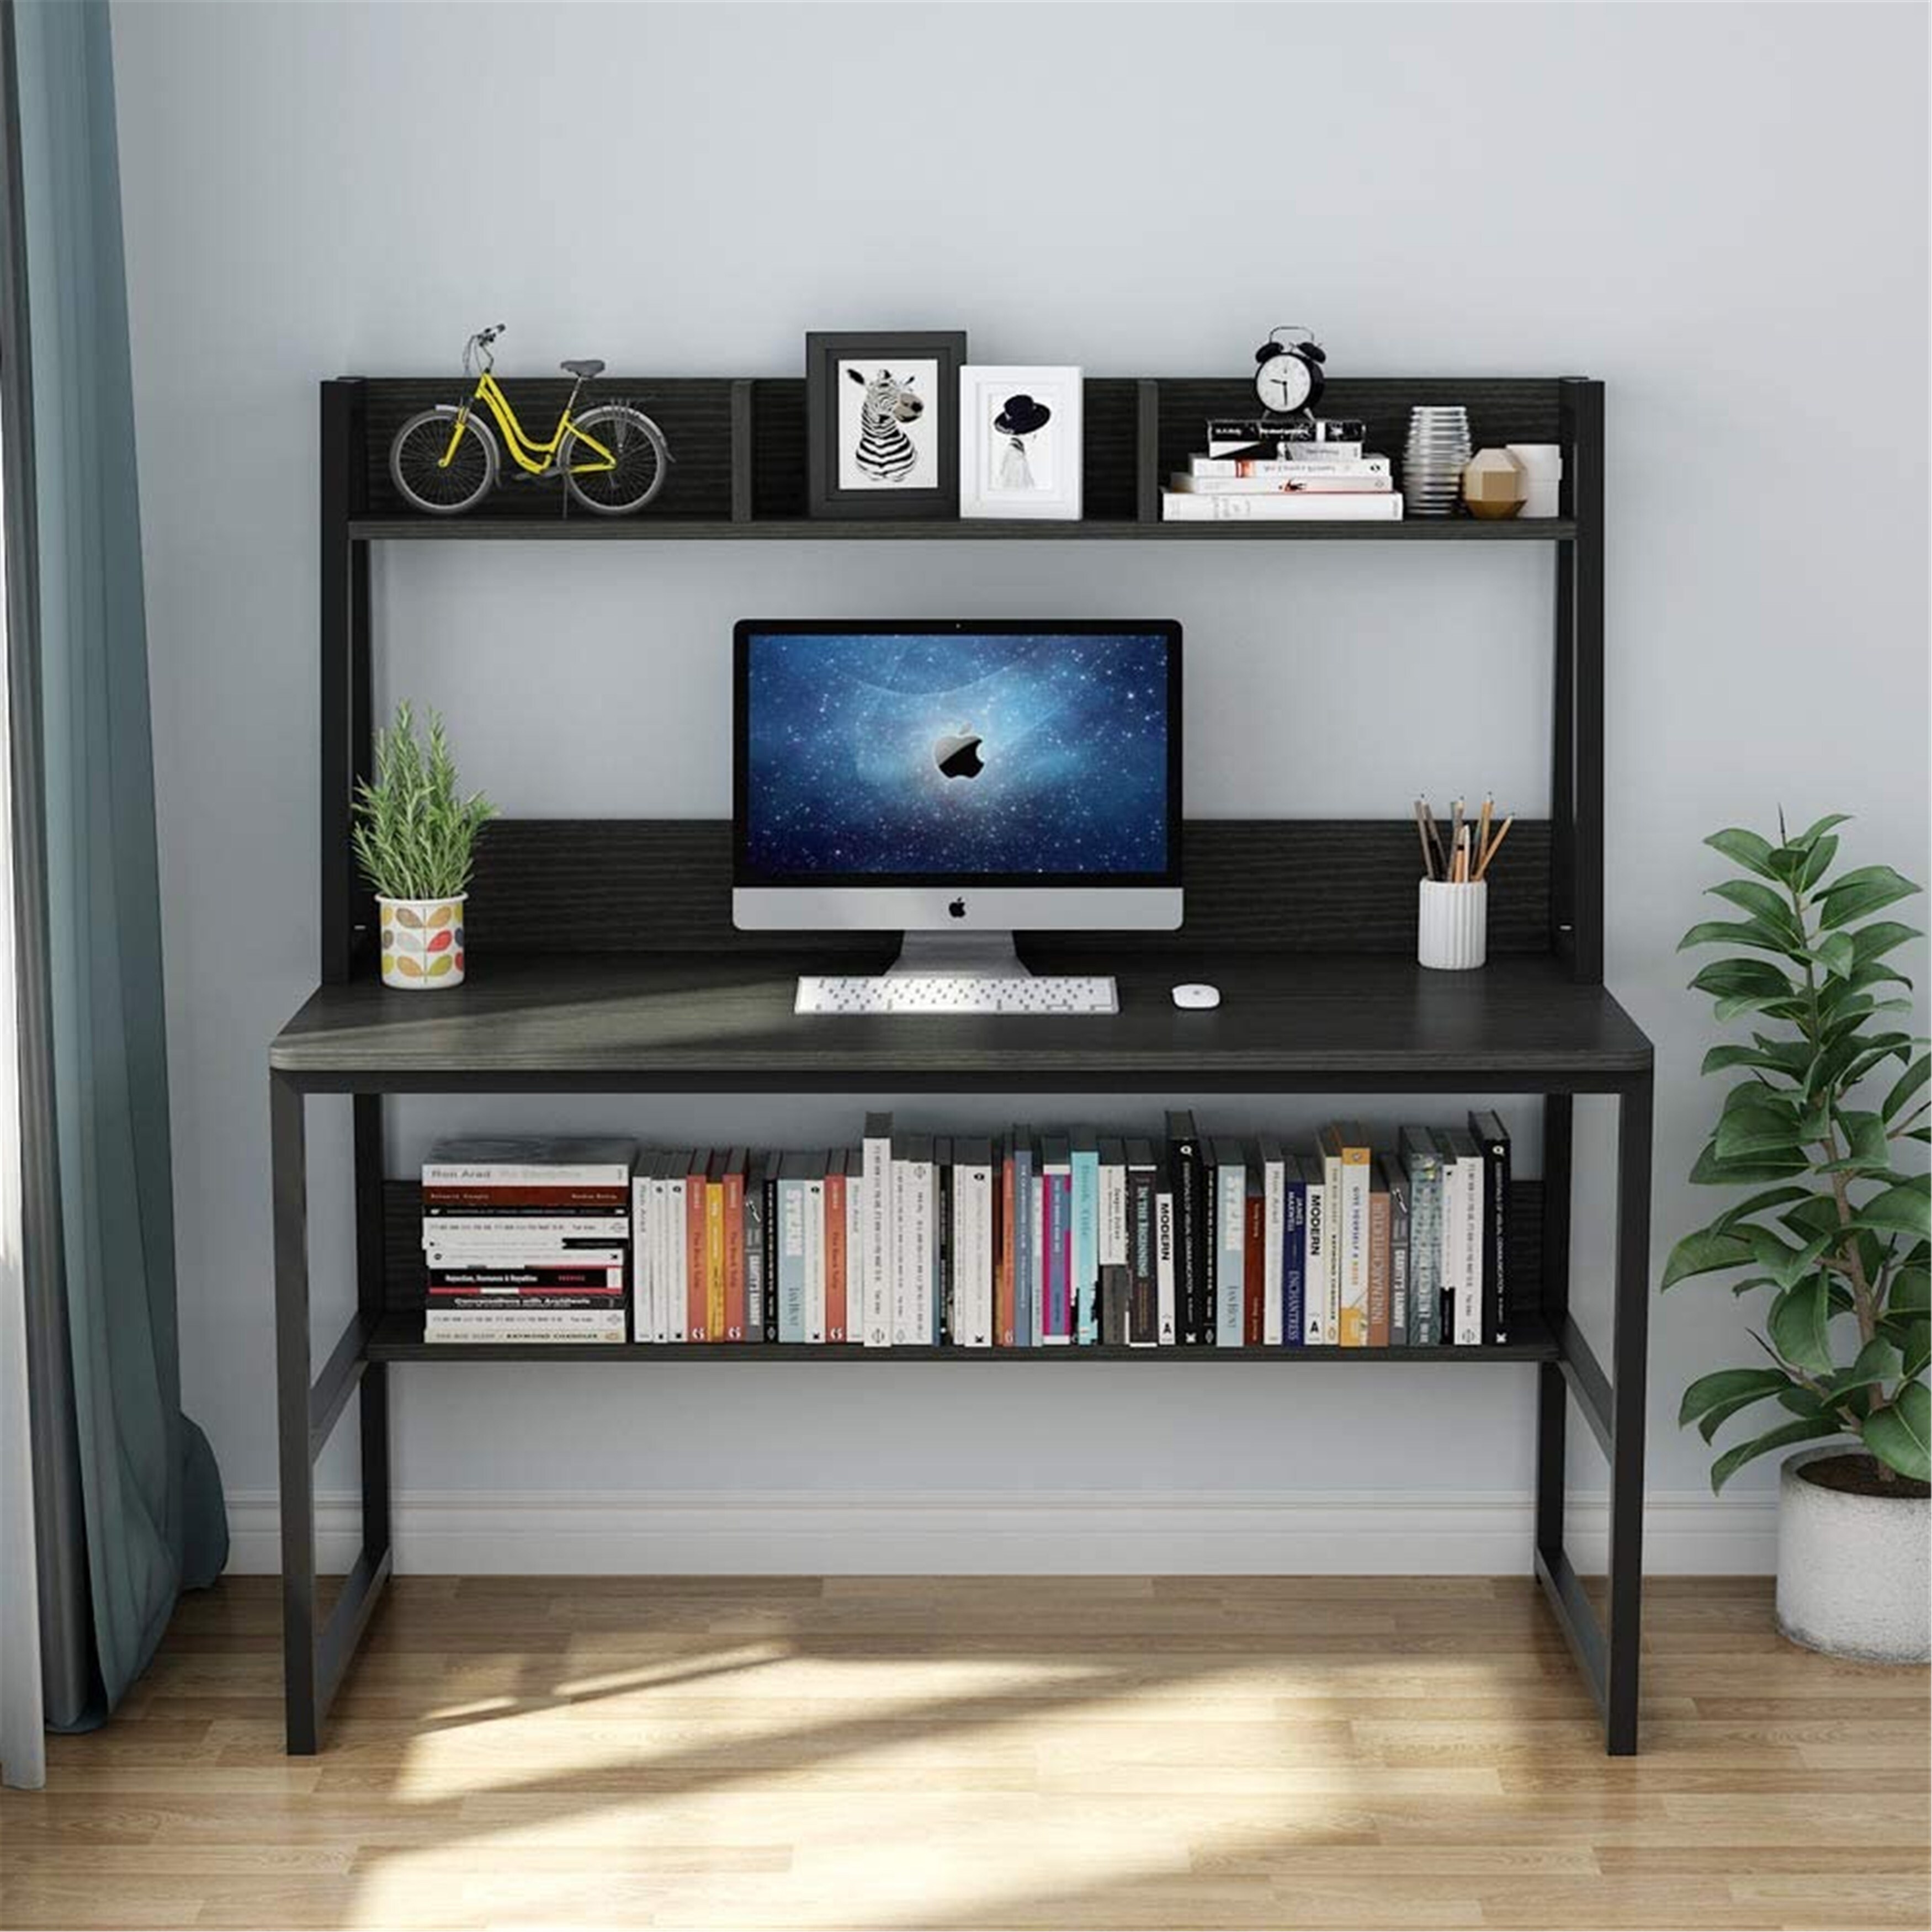 47 Modern Compact Small Space Computer Office Desk with Bookshelf Combo  Black, 1 Unit - Kroger